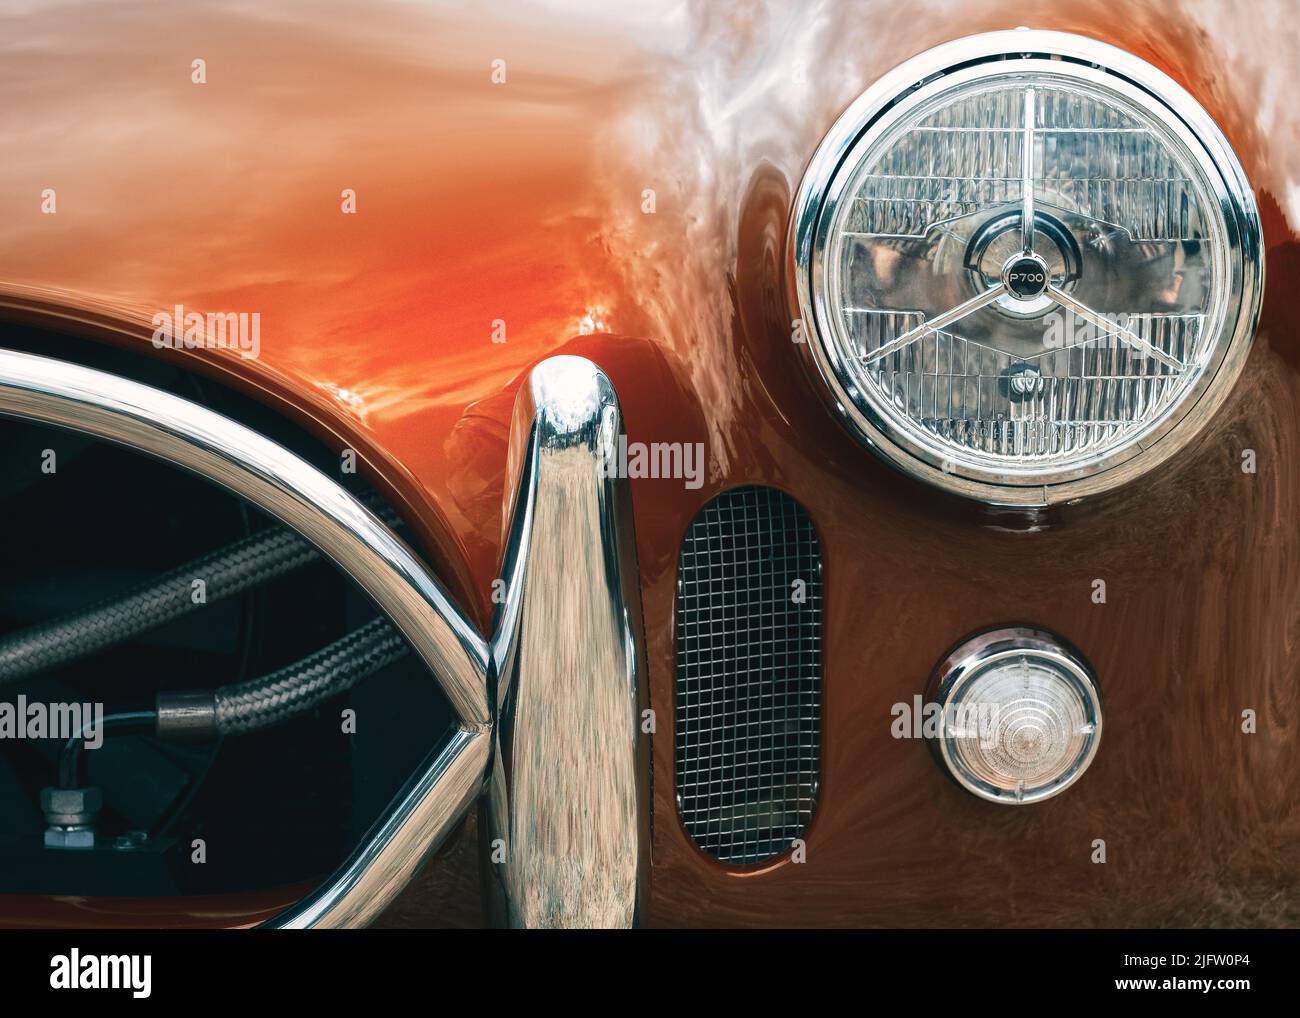 The front headlights and grill section of a red AC Cobra classic sports car Stock Photo